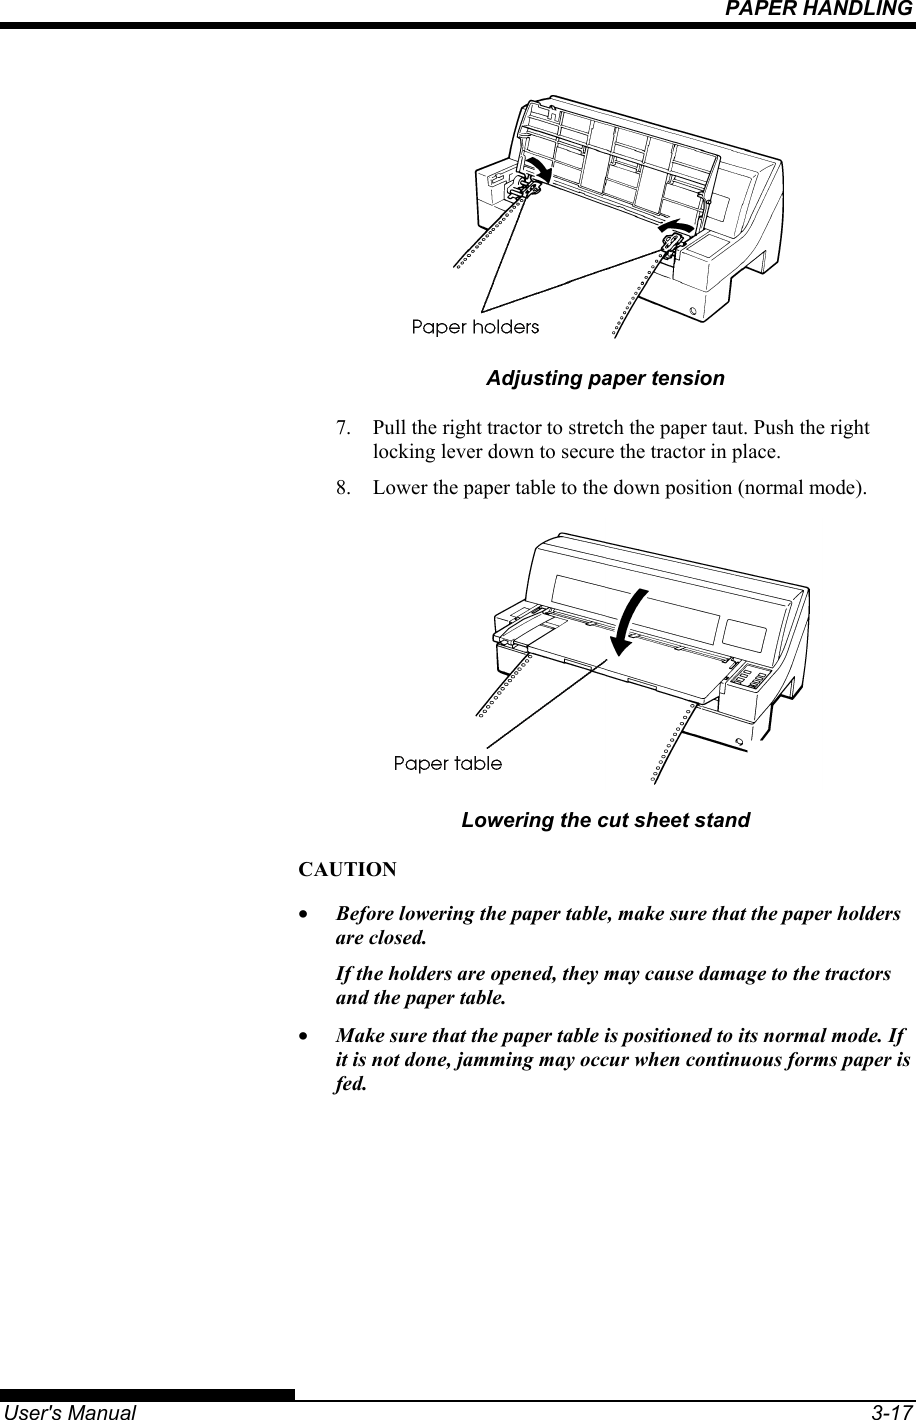 PAPER HANDLING   User&apos;s Manual  3-17  Adjusting paper tension 7.  Pull the right tractor to stretch the paper taut. Push the right locking lever down to secure the tractor in place. 8.  Lower the paper table to the down position (normal mode).  Lowering the cut sheet stand CAUTION •  Before lowering the paper table, make sure that the paper holders are closed. If the holders are opened, they may cause damage to the tractors and the paper table. •  Make sure that the paper table is positioned to its normal mode. If it is not done, jamming may occur when continuous forms paper is fed.  